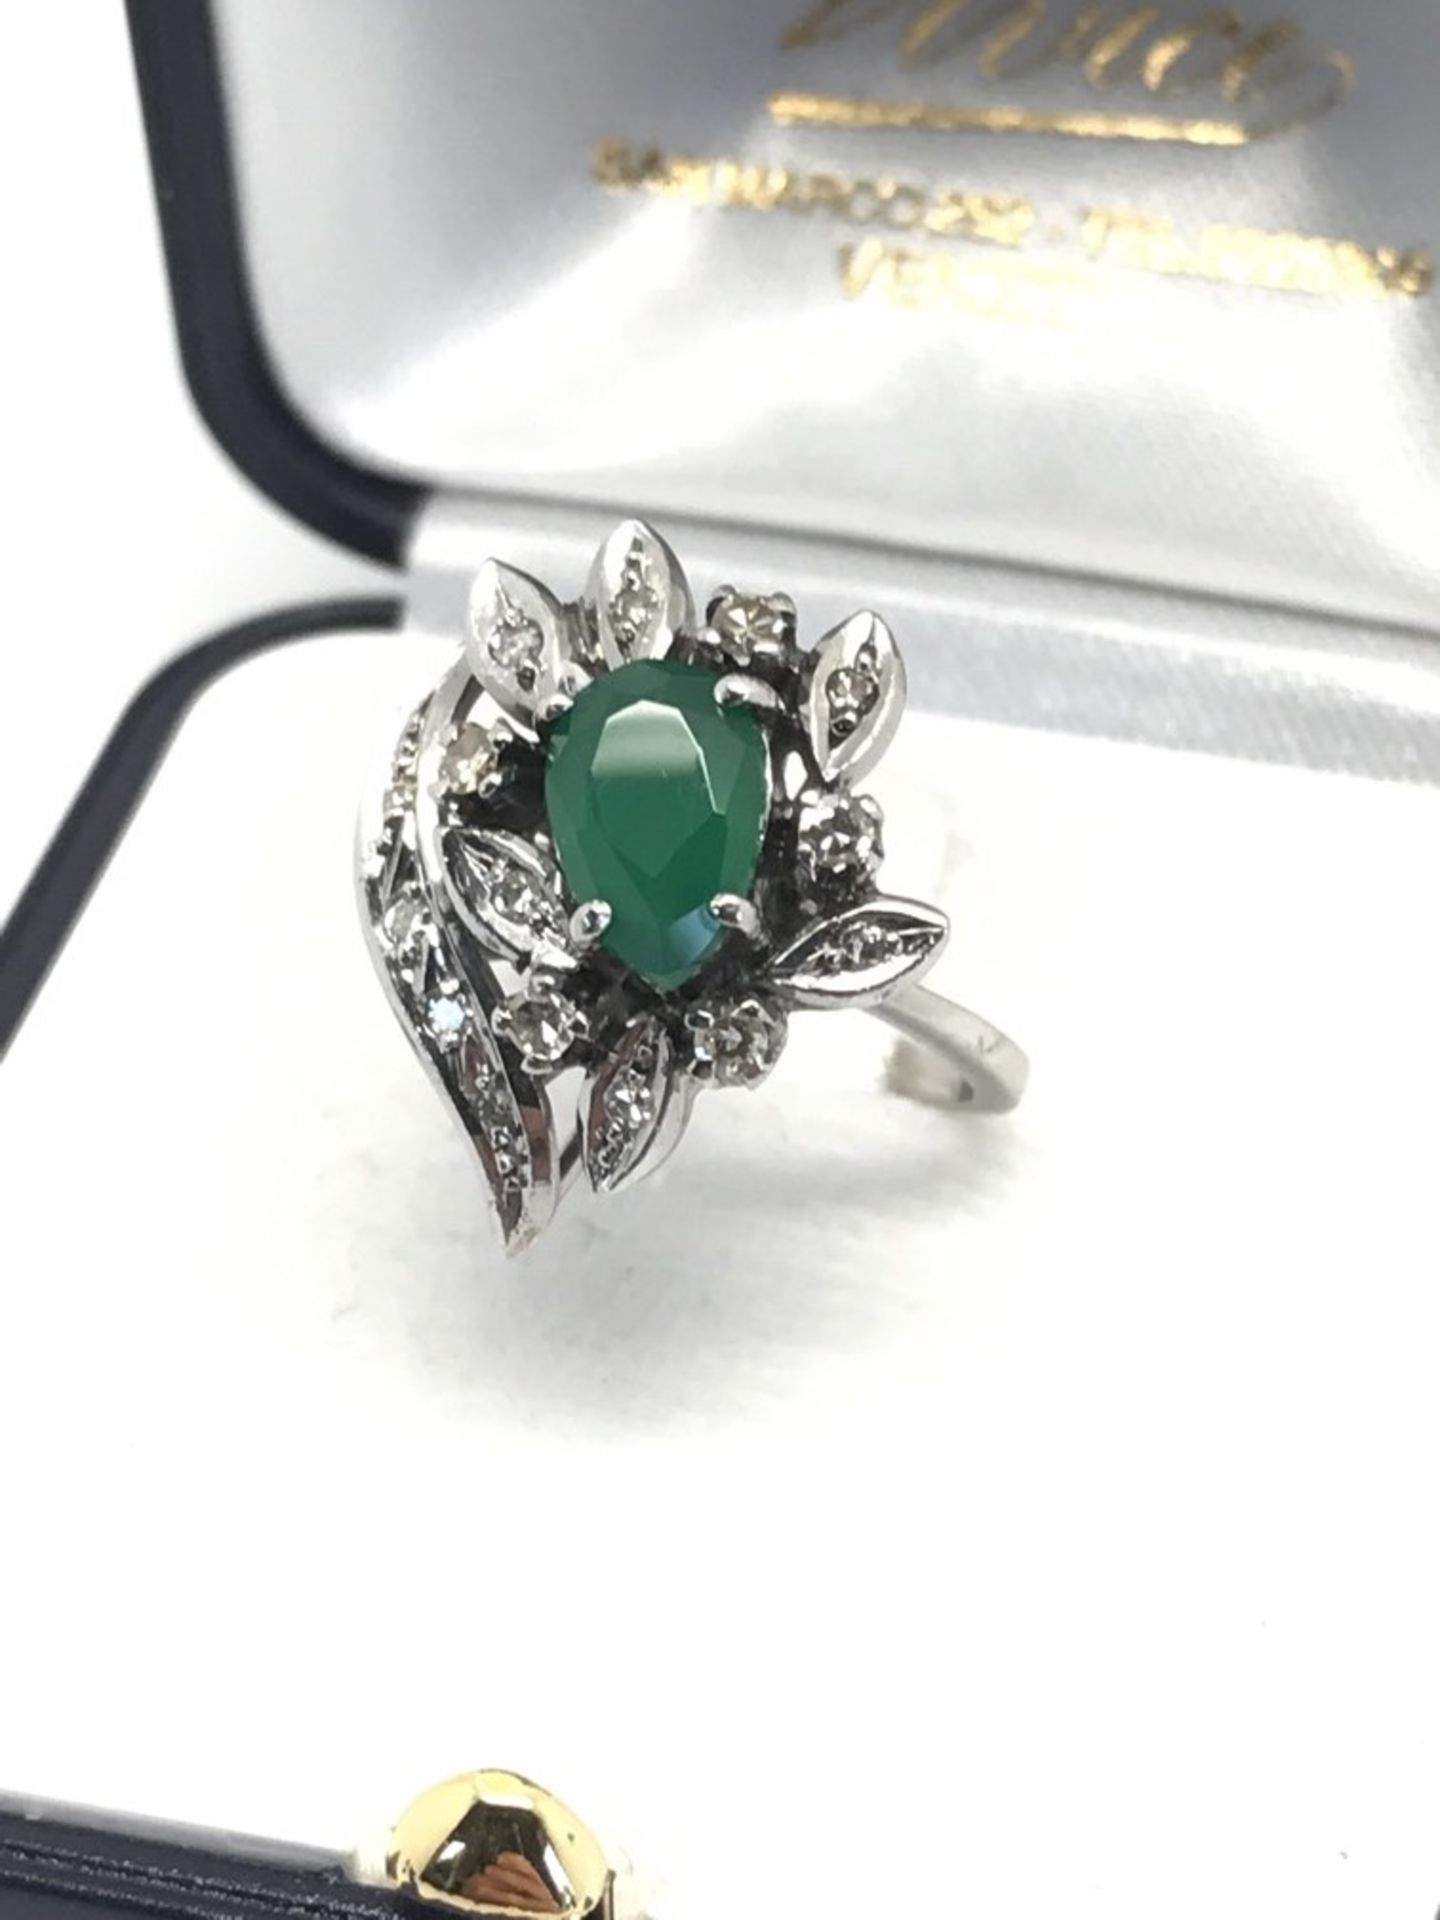 BEAUTIFUL DIAMOND SPRAY CLUSTER RING SET WITH GREEN STONE IN WHITE METAL TESTED AS 14ct GOLD